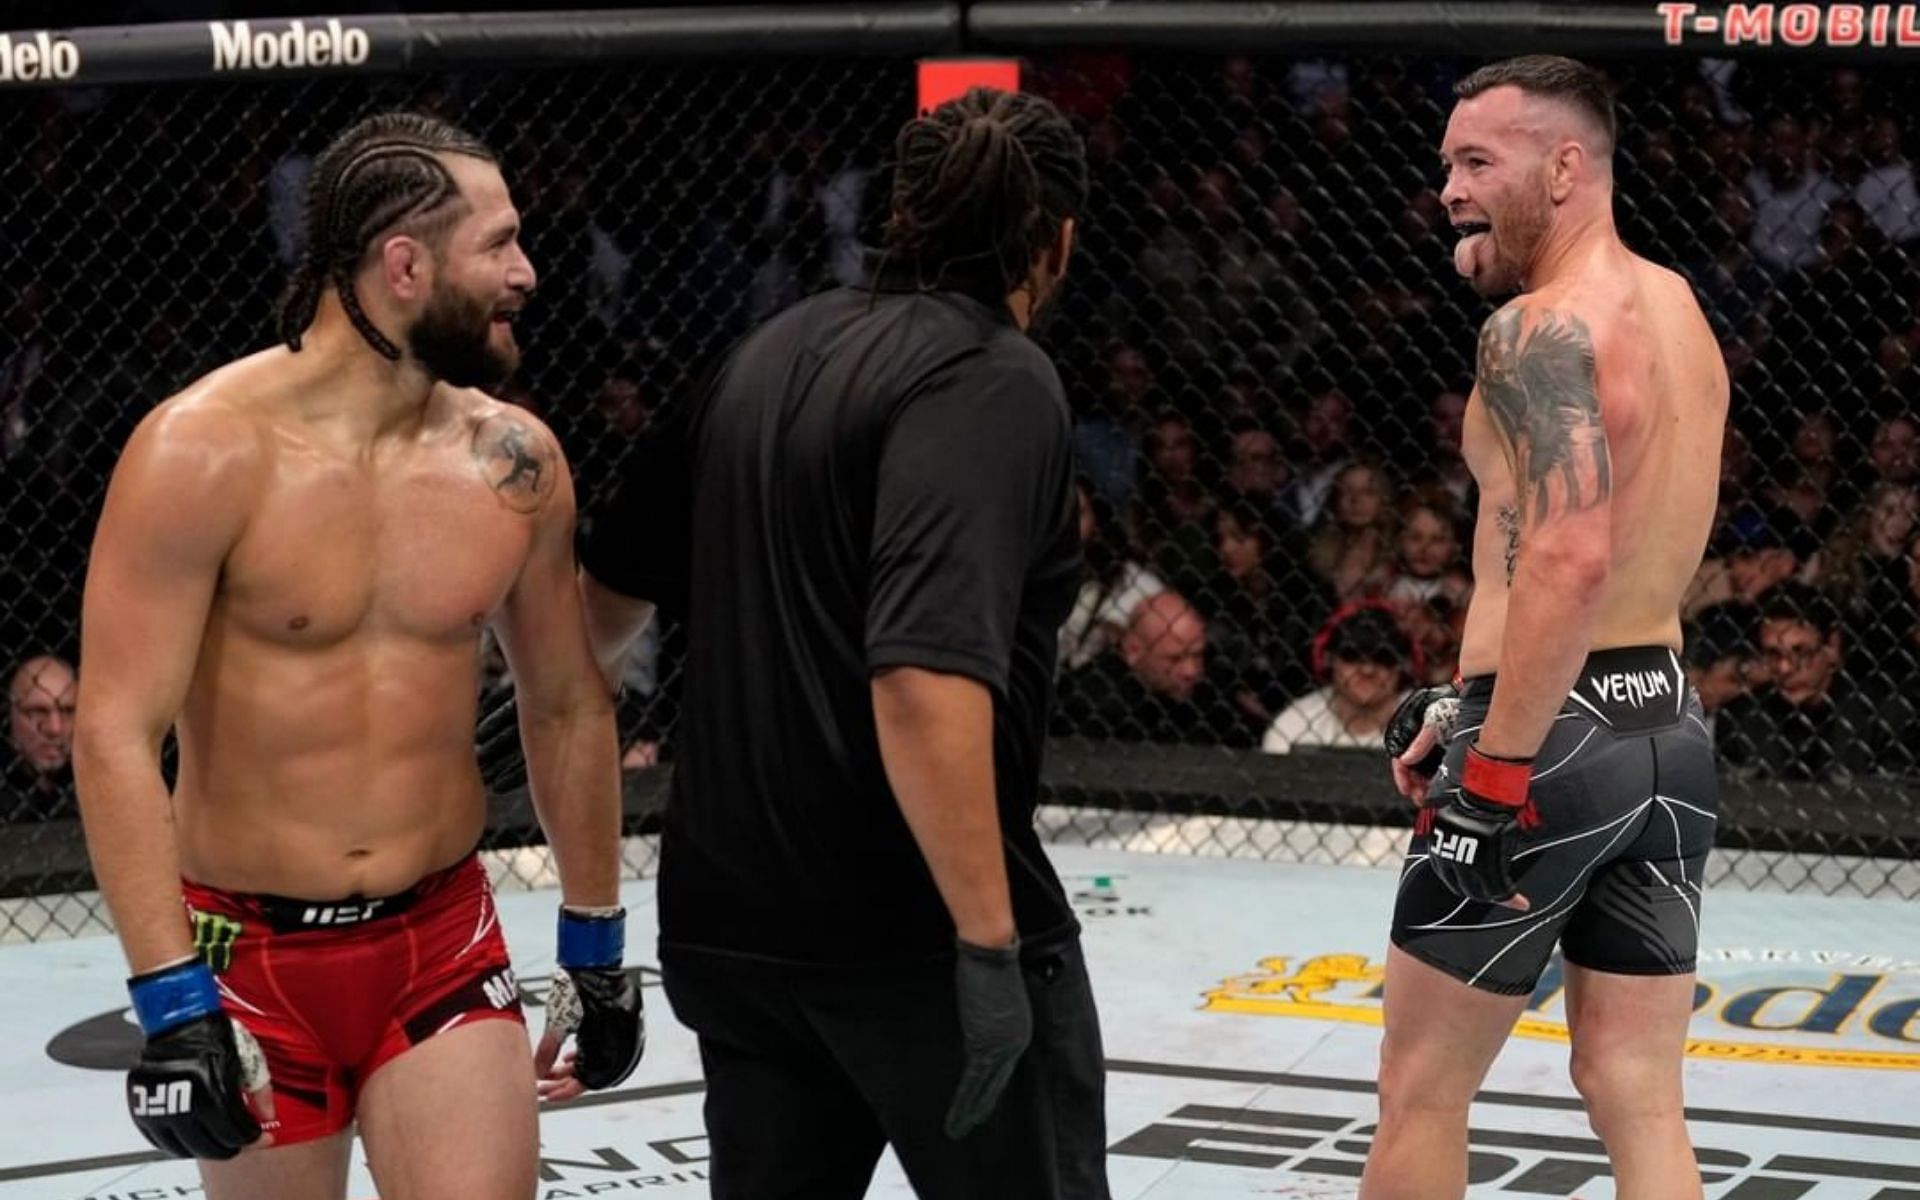 “He was supposed to fight Edward Scissorhands” – Colby Covington says Jorge Masvidal should thank him for main event feature